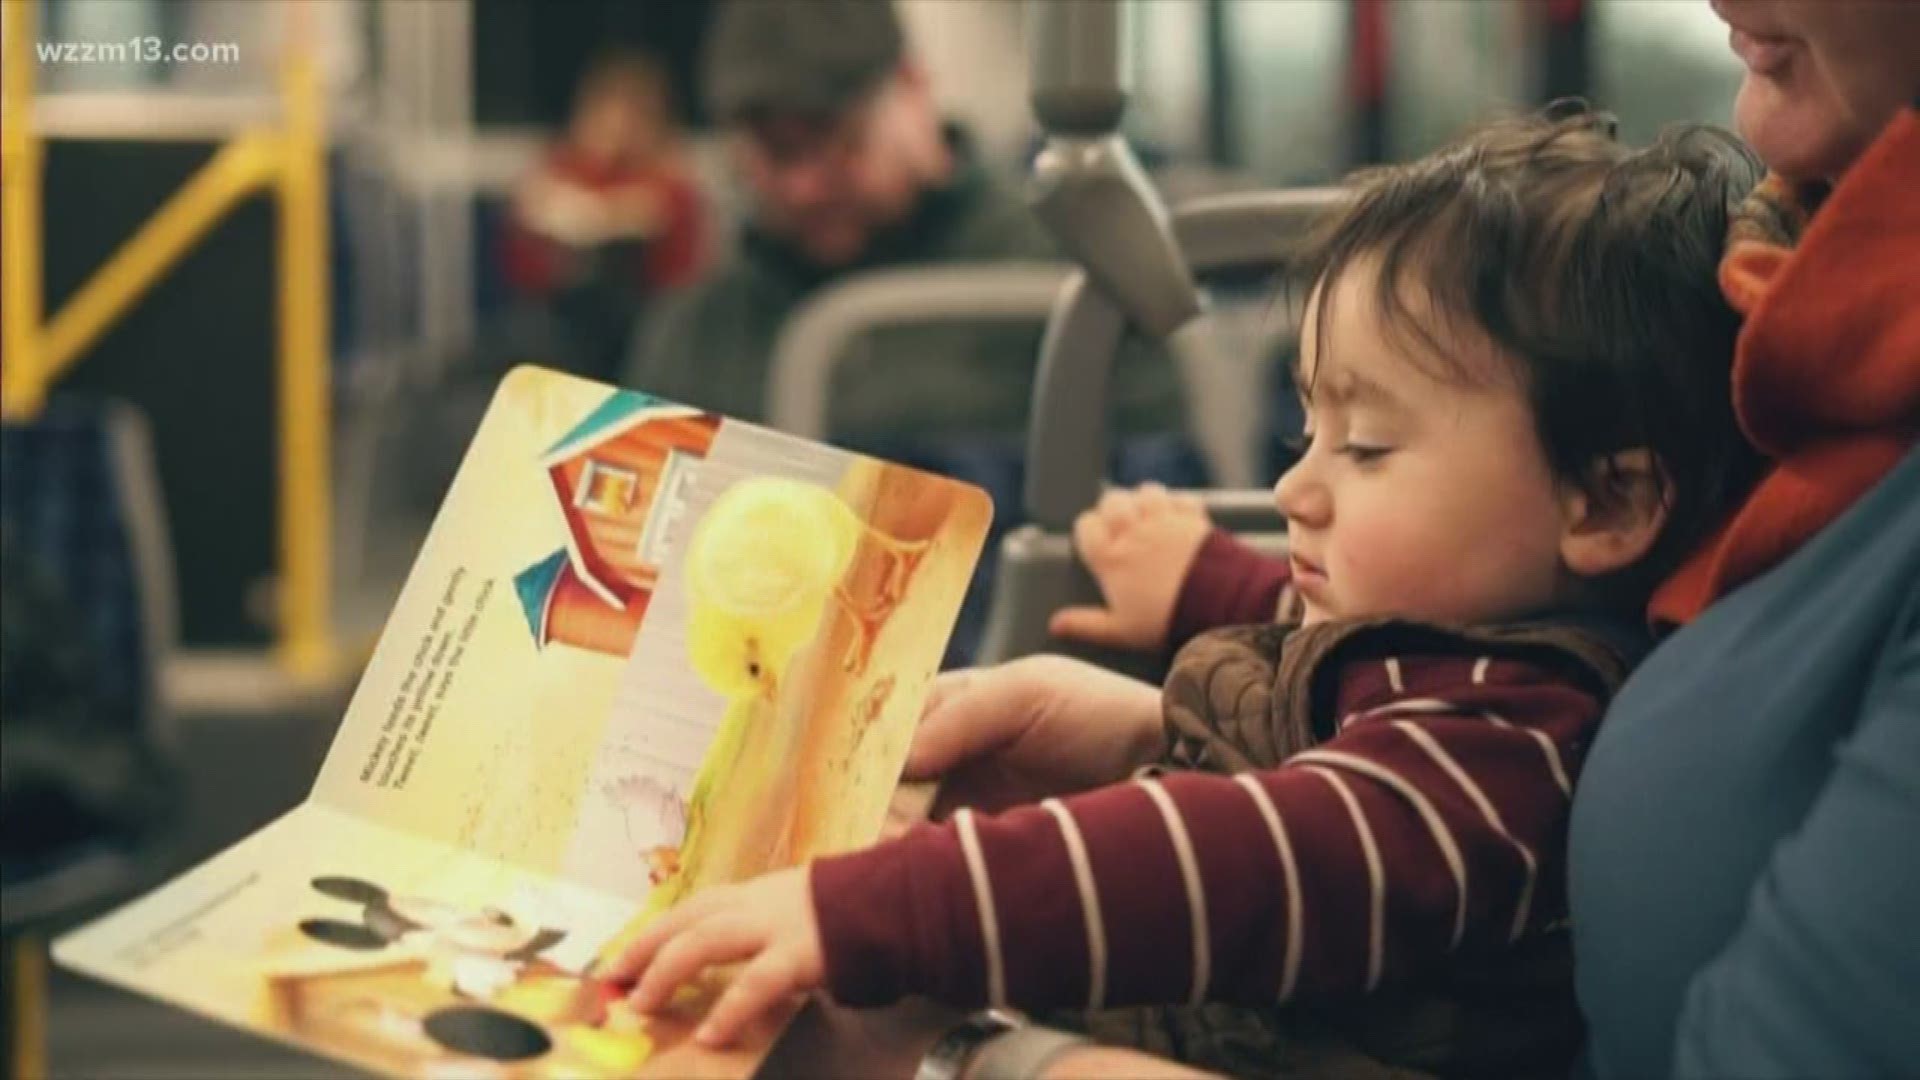 KDL encourages people to read books while riding the bus